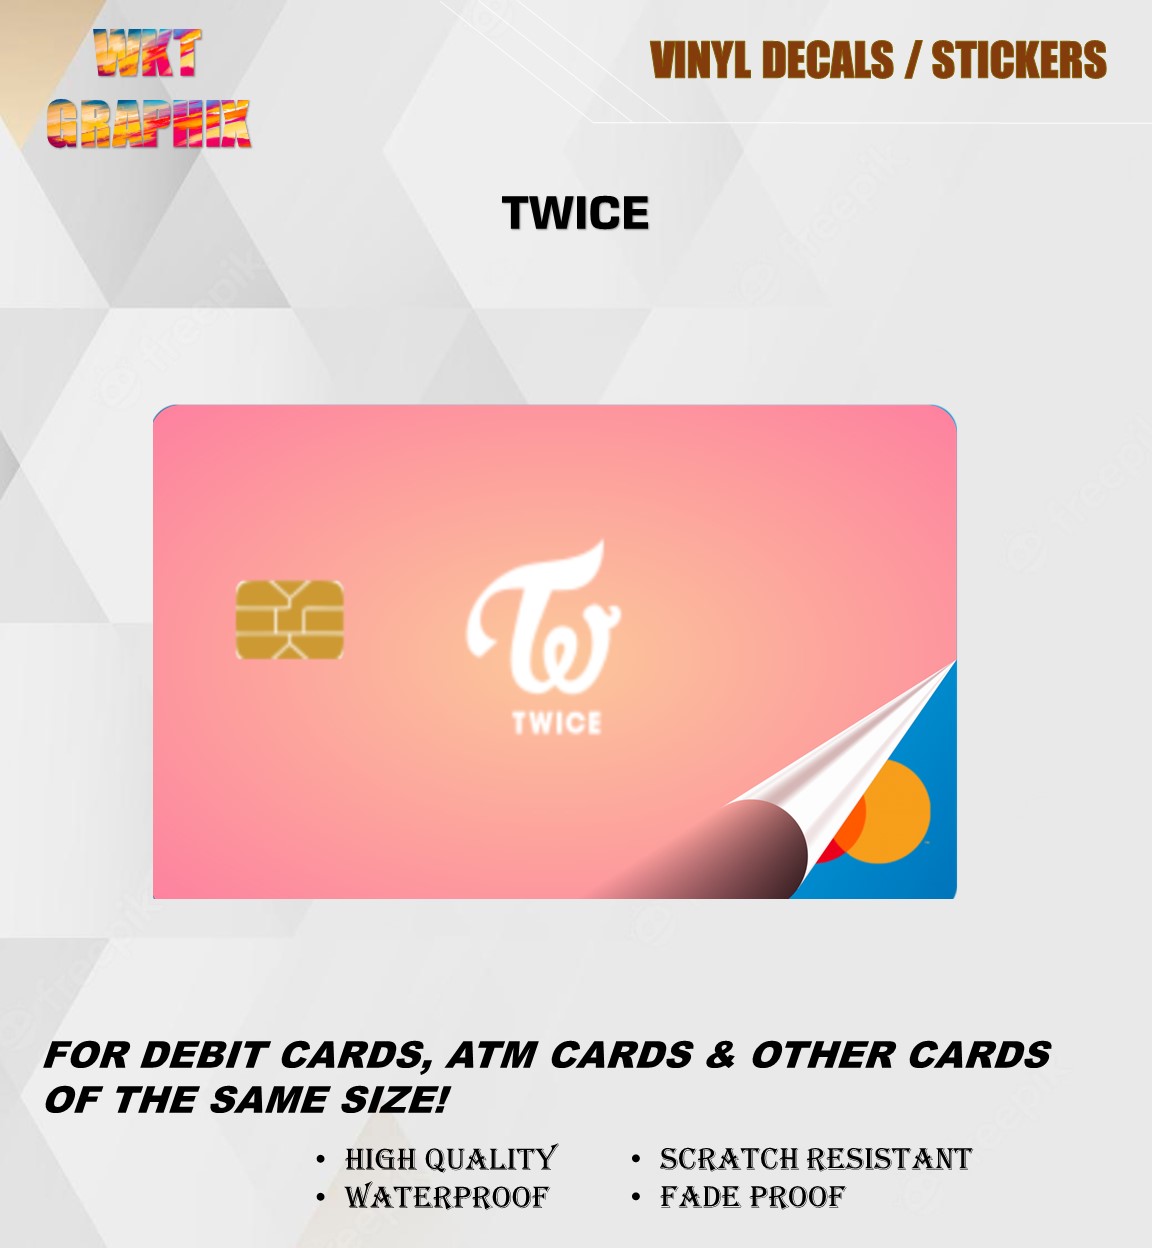 KPOP CARD SKIN DESIGNS PART 2 FOR DEBIT CARDS AND BEEP CARDS